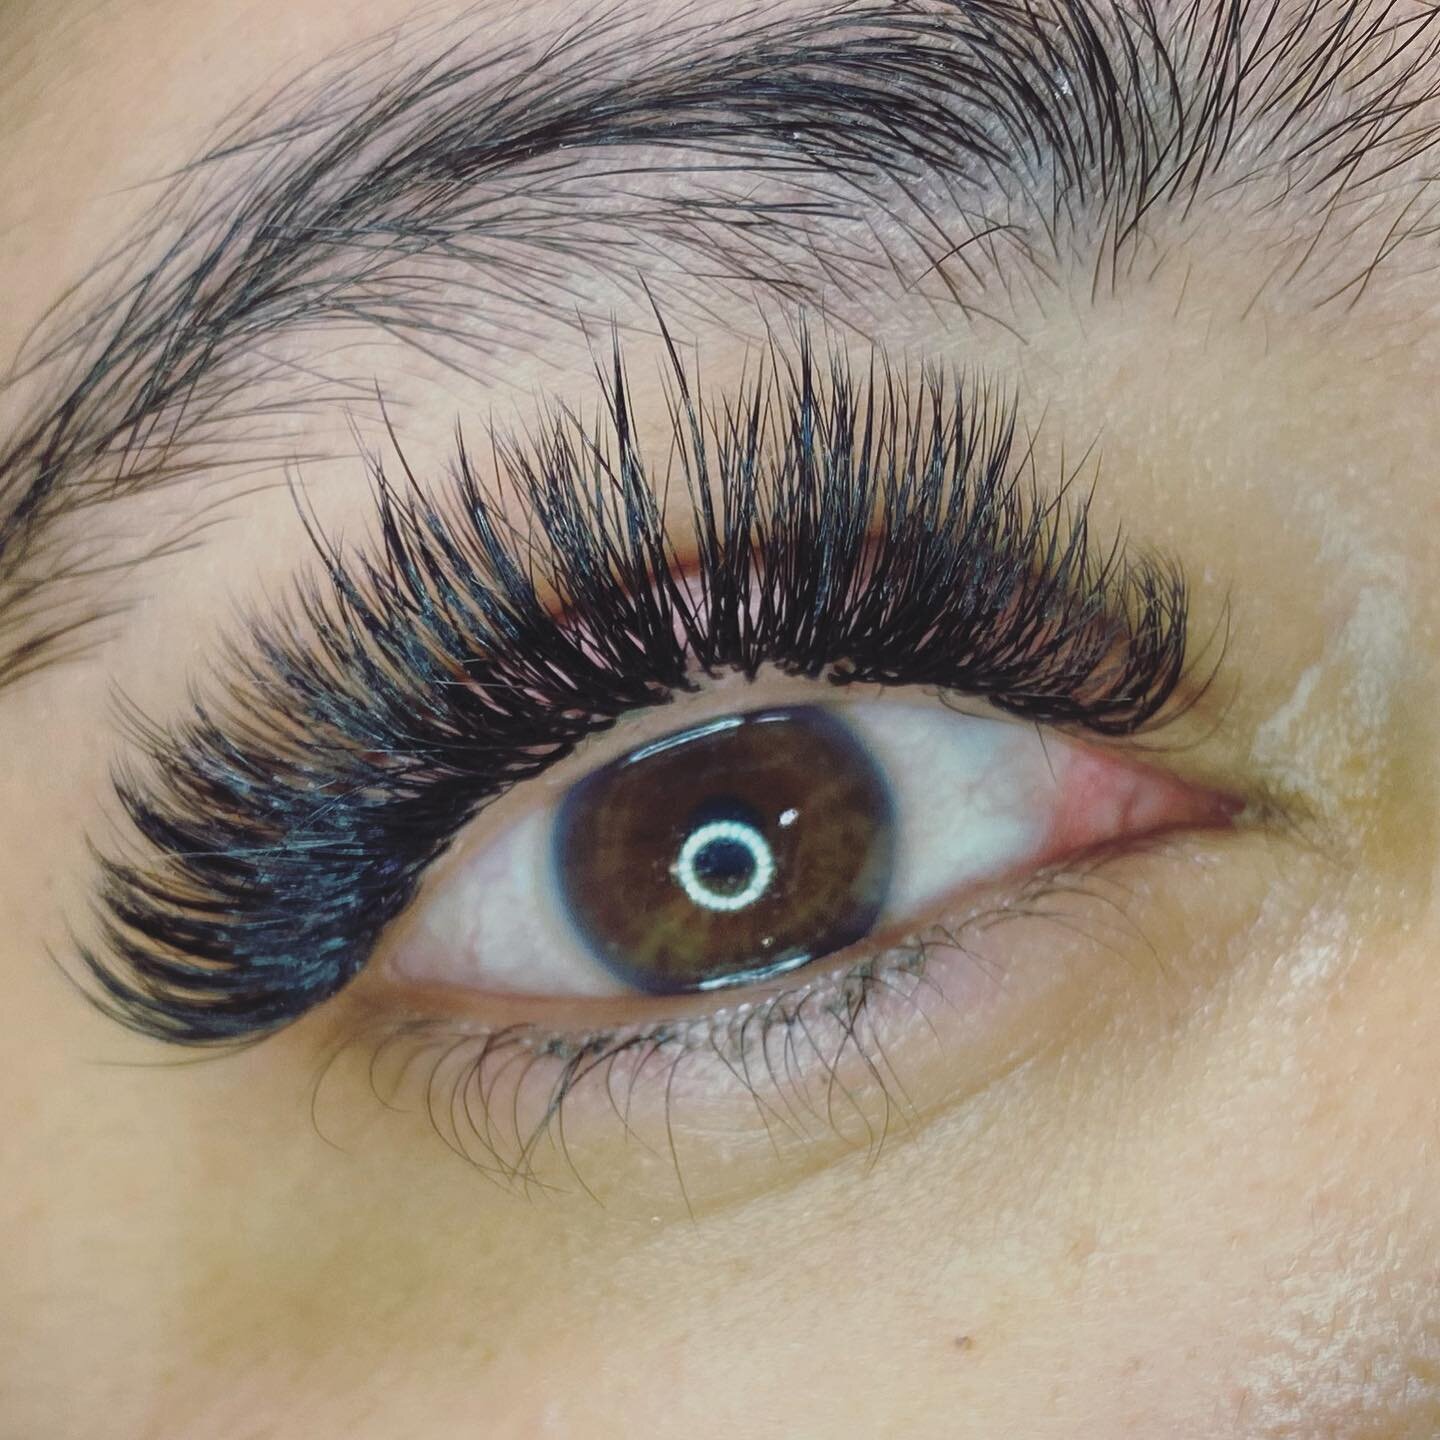 &ldquo;I&rsquo;ve been going to BB Lash since 2014. Britni and her stylists are the masters of lashes...I won&rsquo;t let anyone else touch mine! Their meticulous eye for detail is what sets them apart from the rest.&rdquo; 

- Kat M.

PS. Did you kn